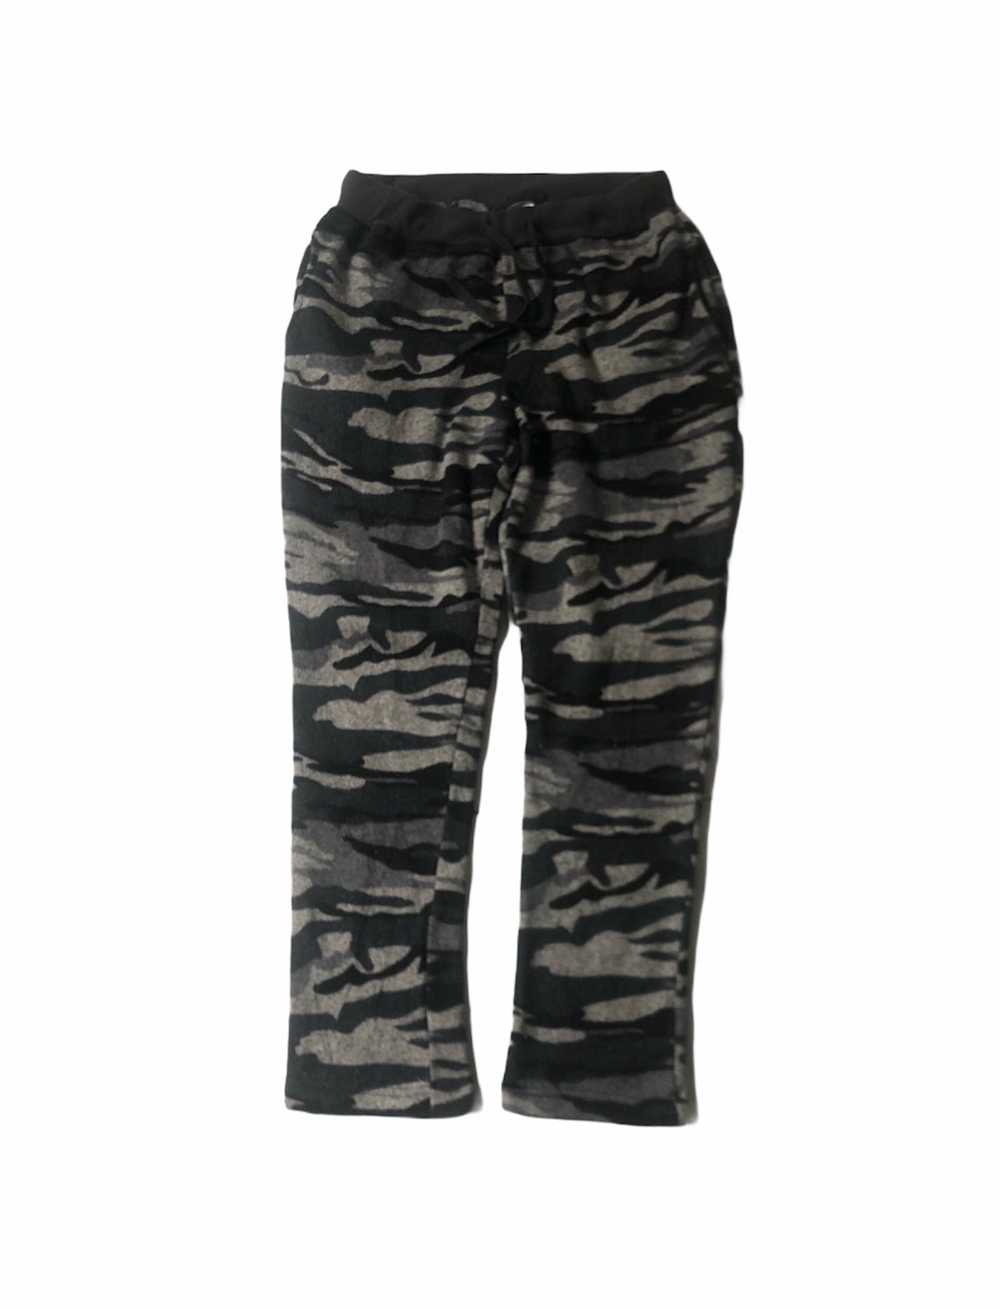 Other 🔥Military Styles Sweatpants - image 1